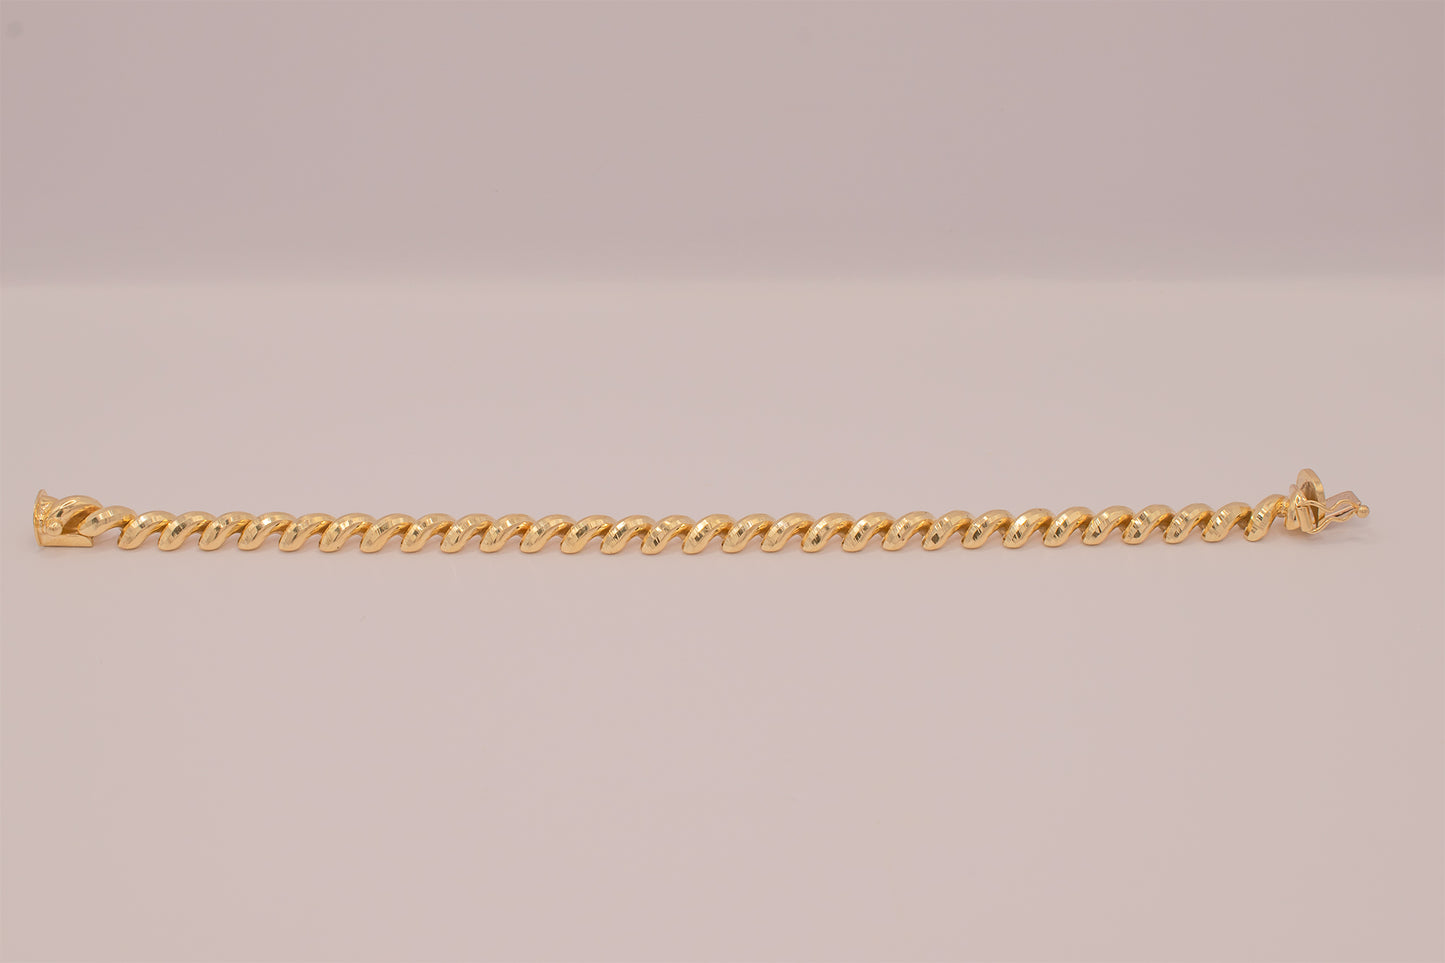 Vintage 14K Yellow Gold San Marco Macaroni Link Bracelet With Shimmering High Polish Finish 7 1/2 inches